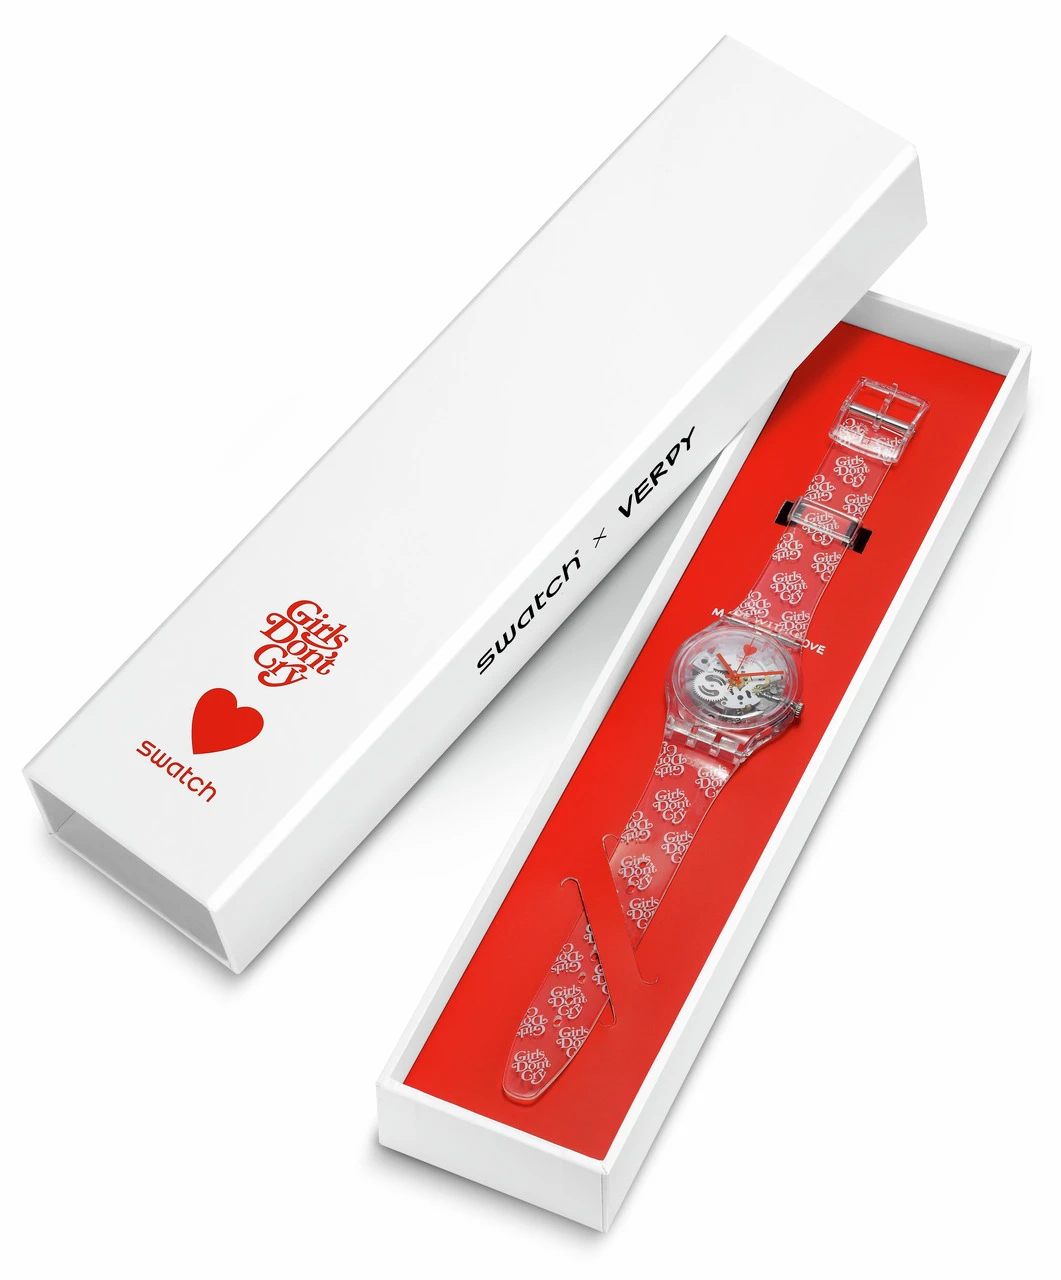 A swatch watch with a transparent case and vibrant red band featuring heart patterns, presented in an elegant white box with the swatch logo and a heart design.